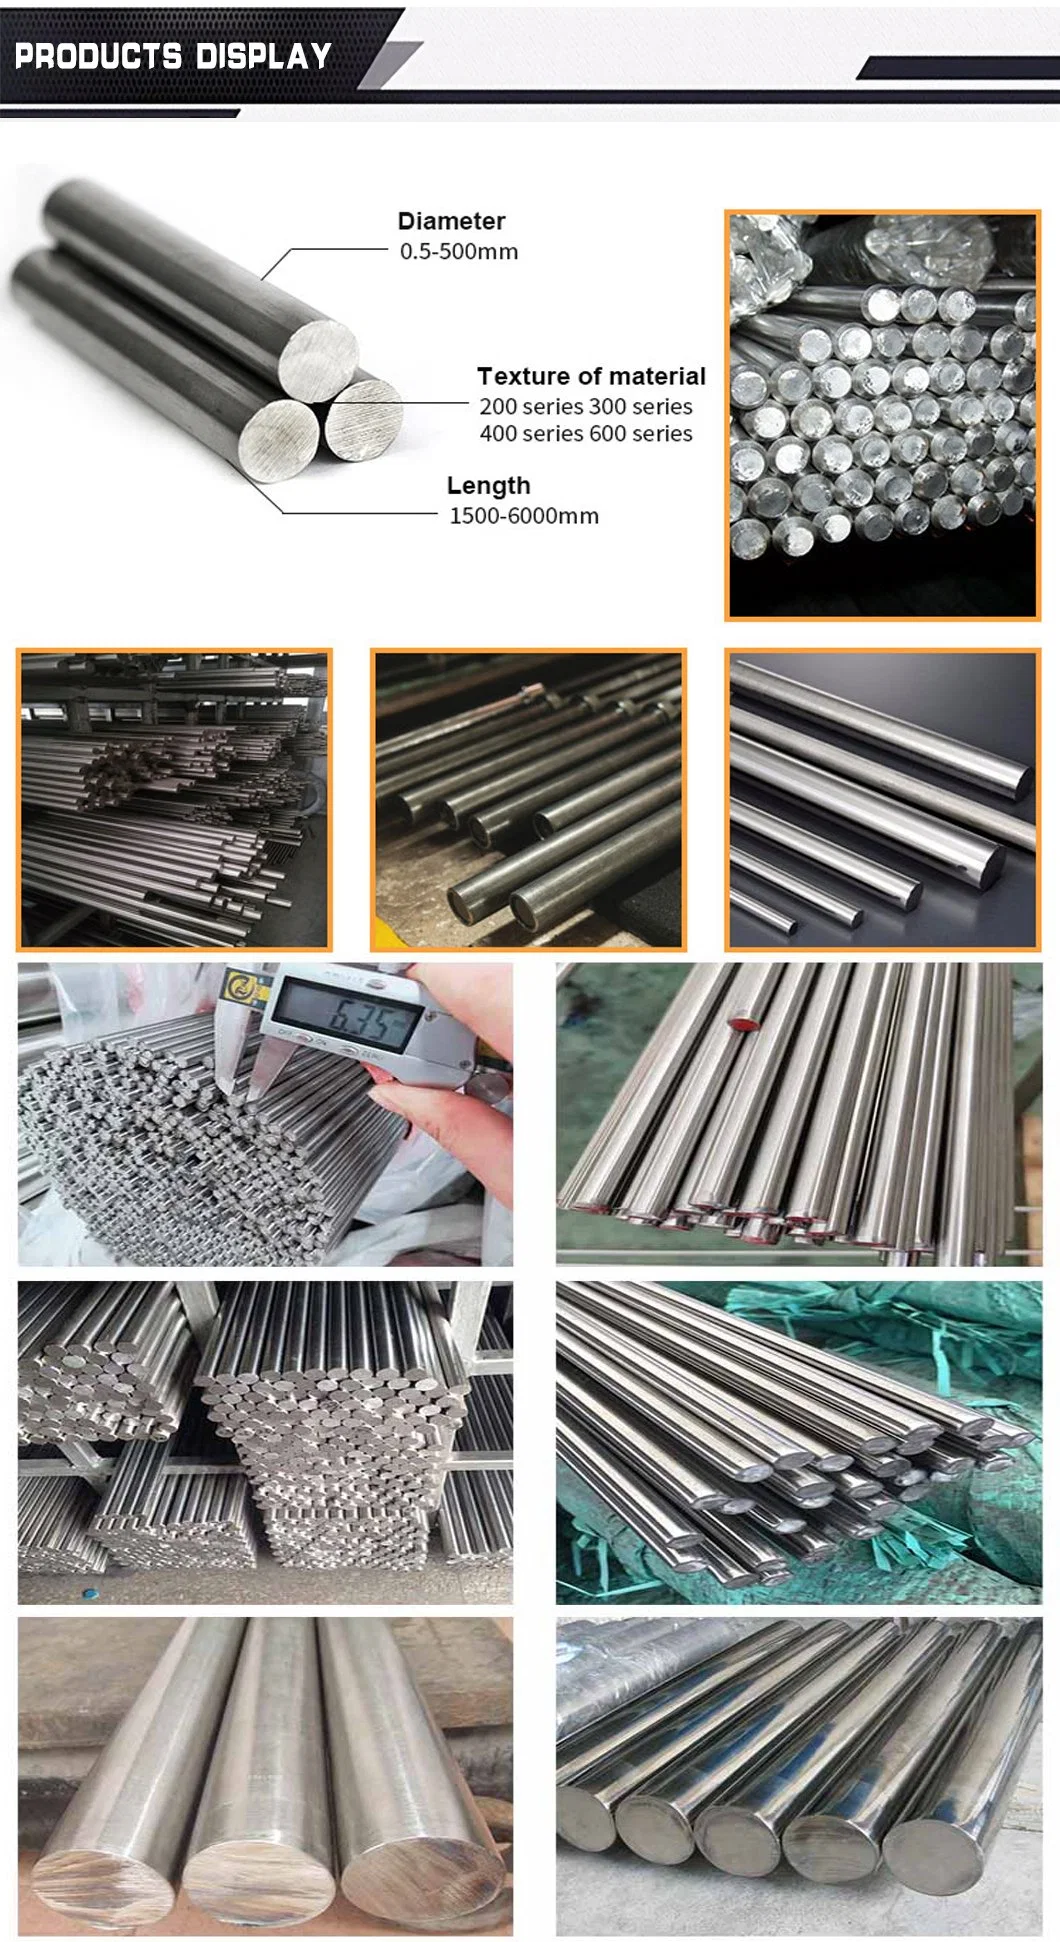 Factory Supply Ss Round Bar AISI ASTM JIS DIN 304 316L 310S 409 410 420 430 431 420f 430f 444 Stainless Steel Round Rod/Bar